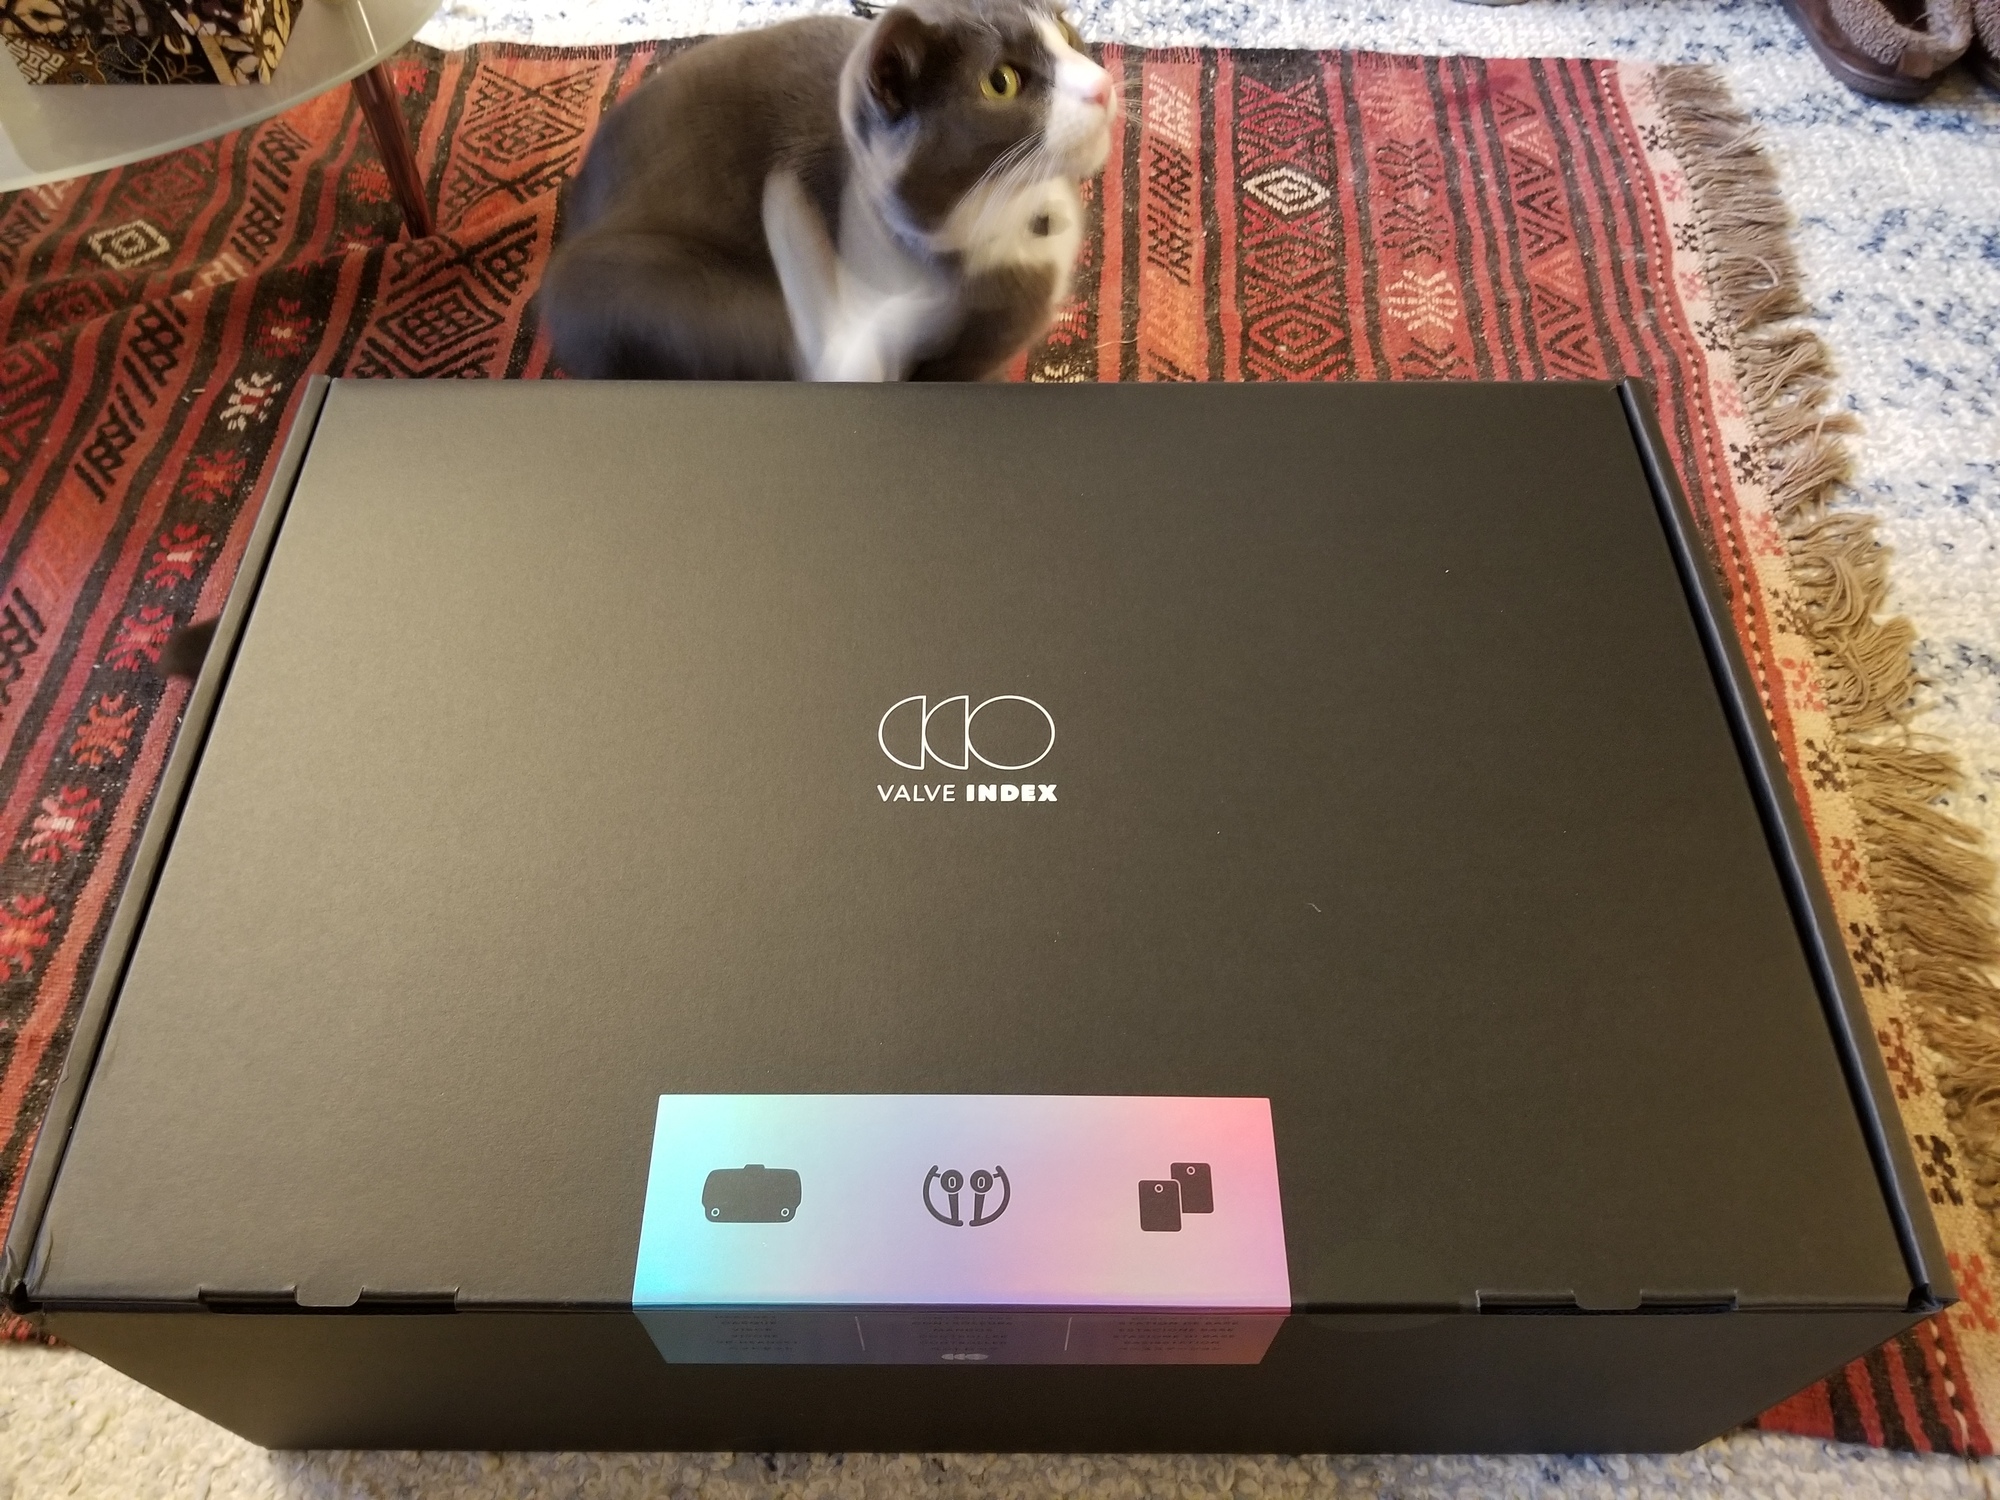 With a cat (in mid-scratch) for scale, you can see the heft of the Valve Index VR Kit box.